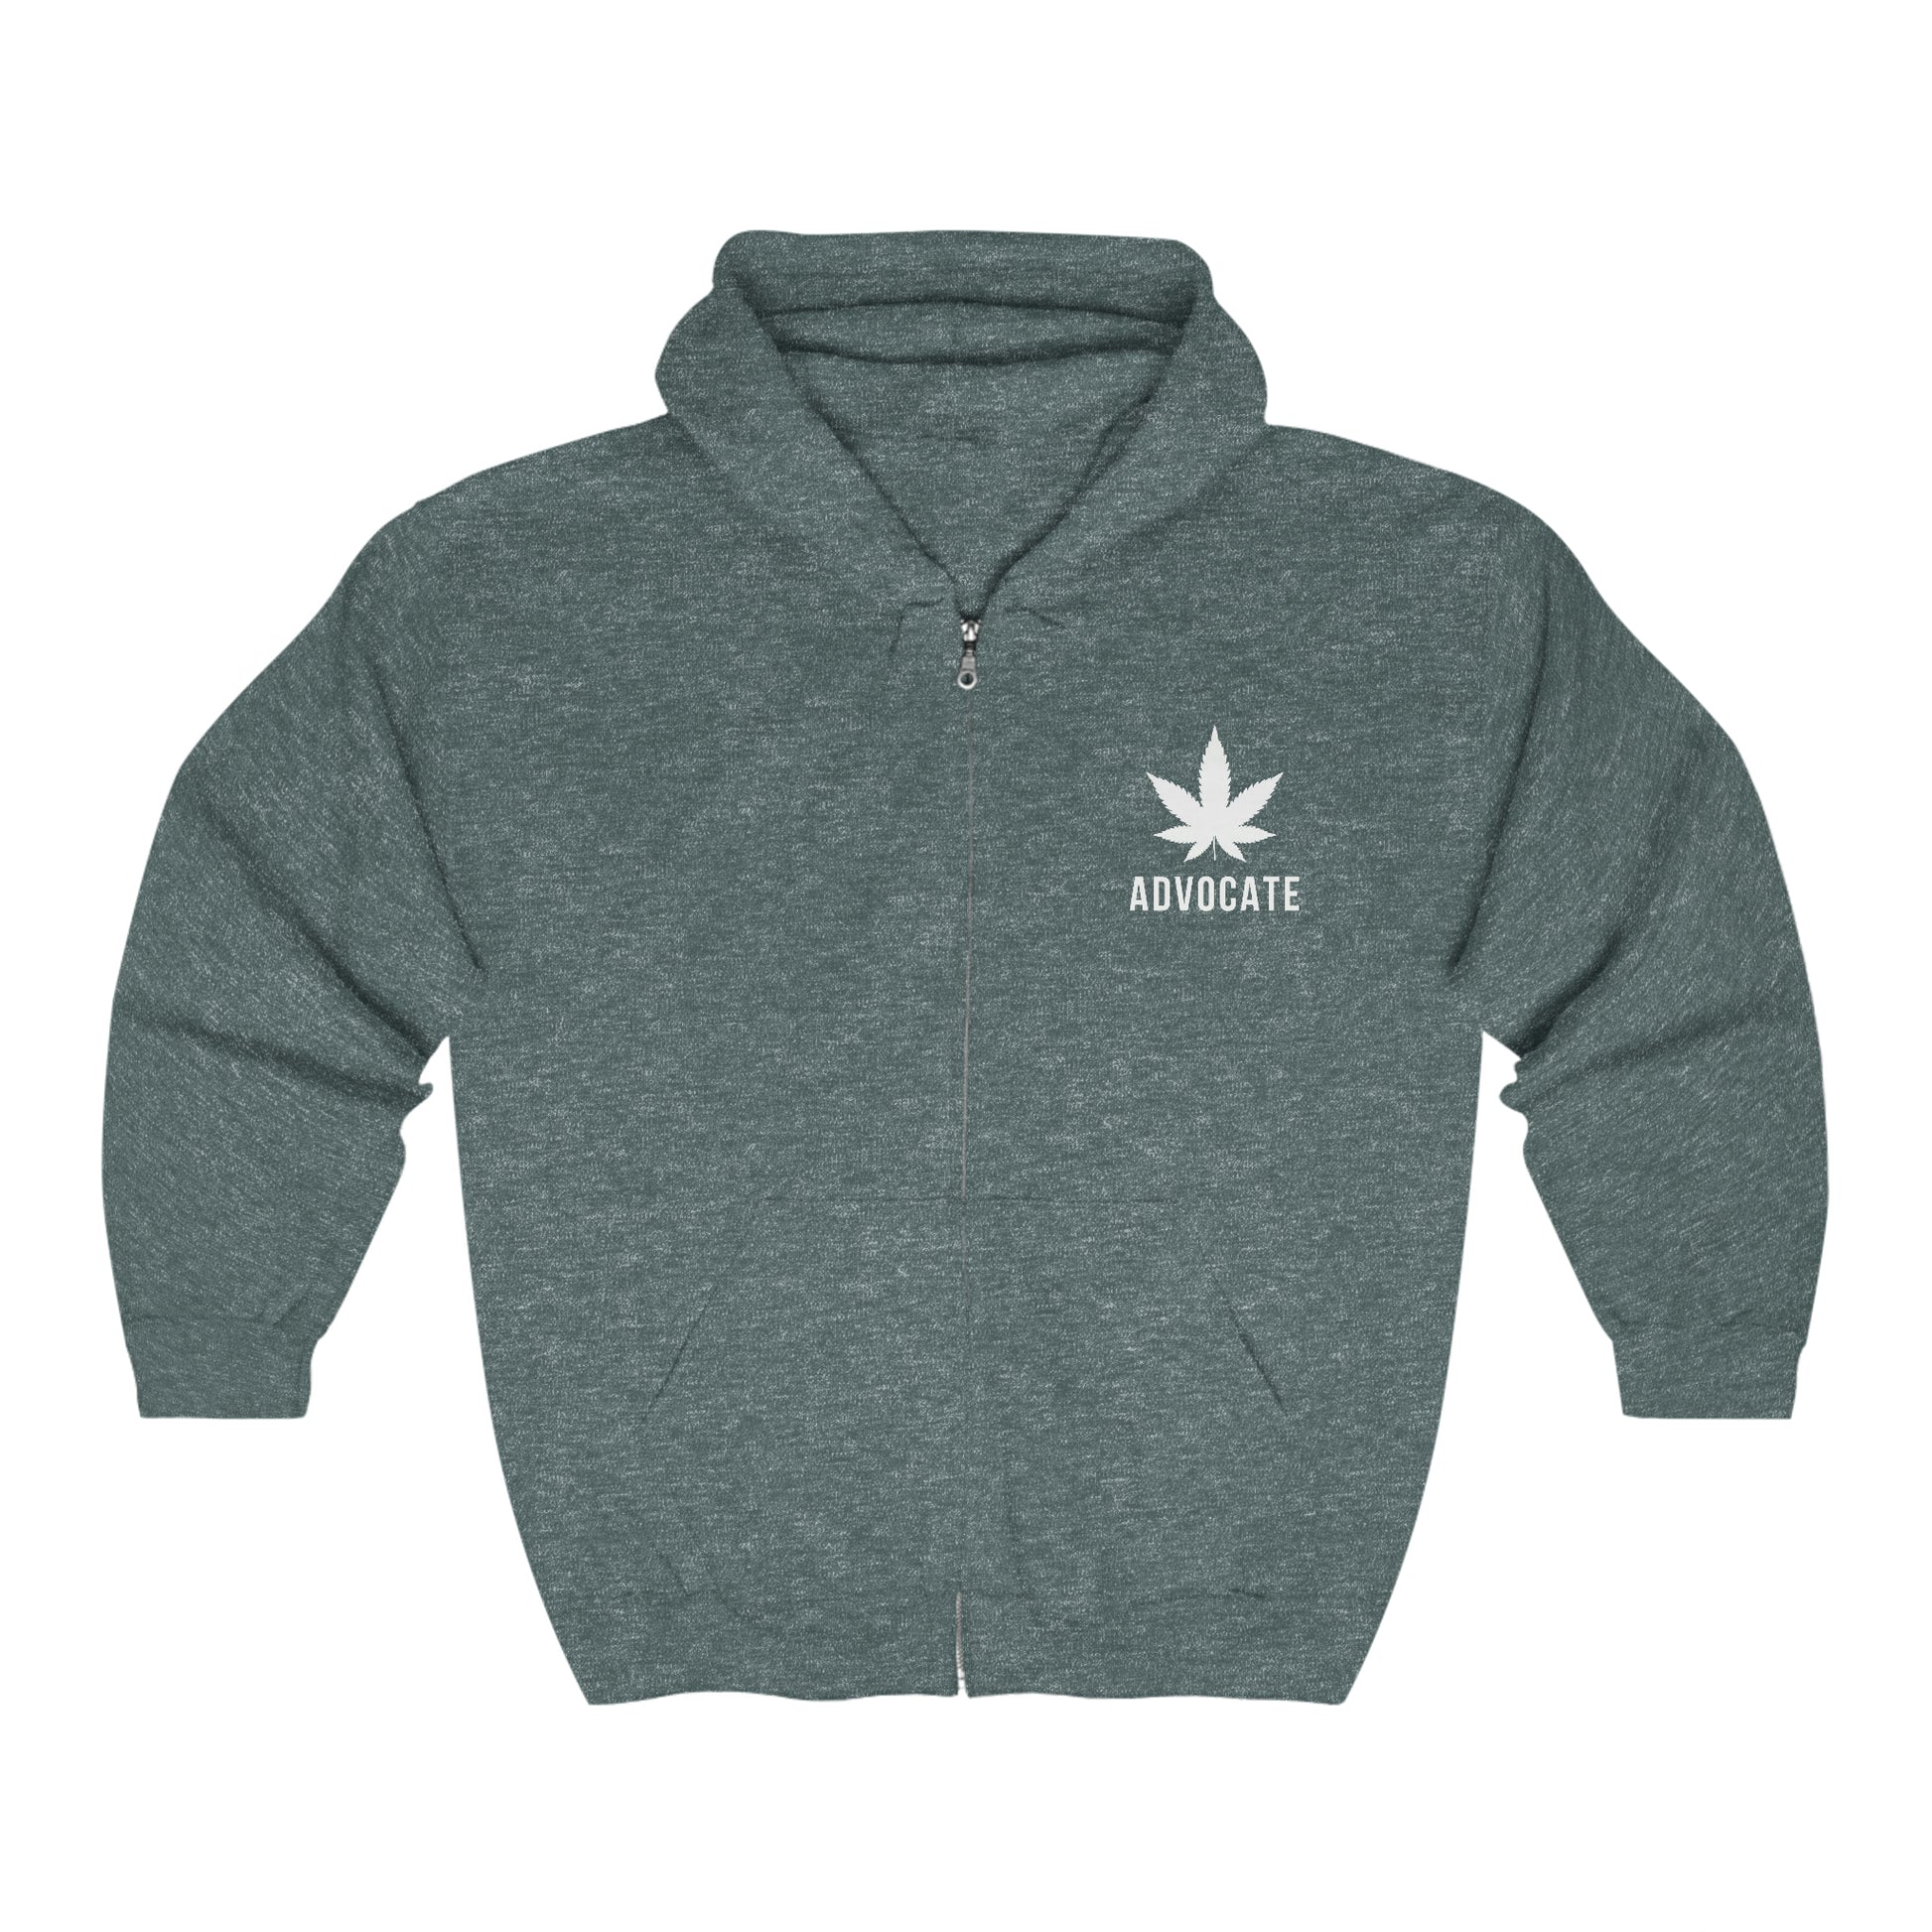 A Cannabis Advocate Weed Zip Up Hoodie with a marijuana leaf on it.